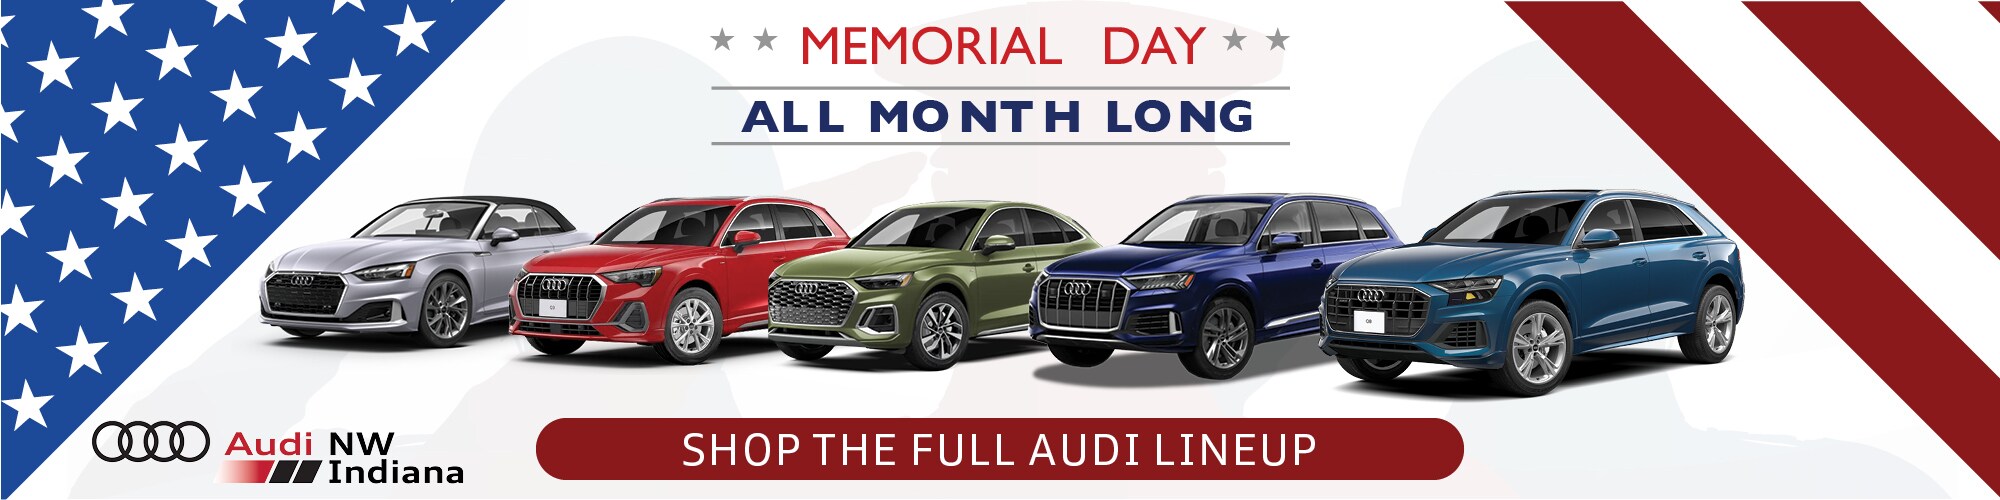 Shop the full Audi lineup this Memorial Day month